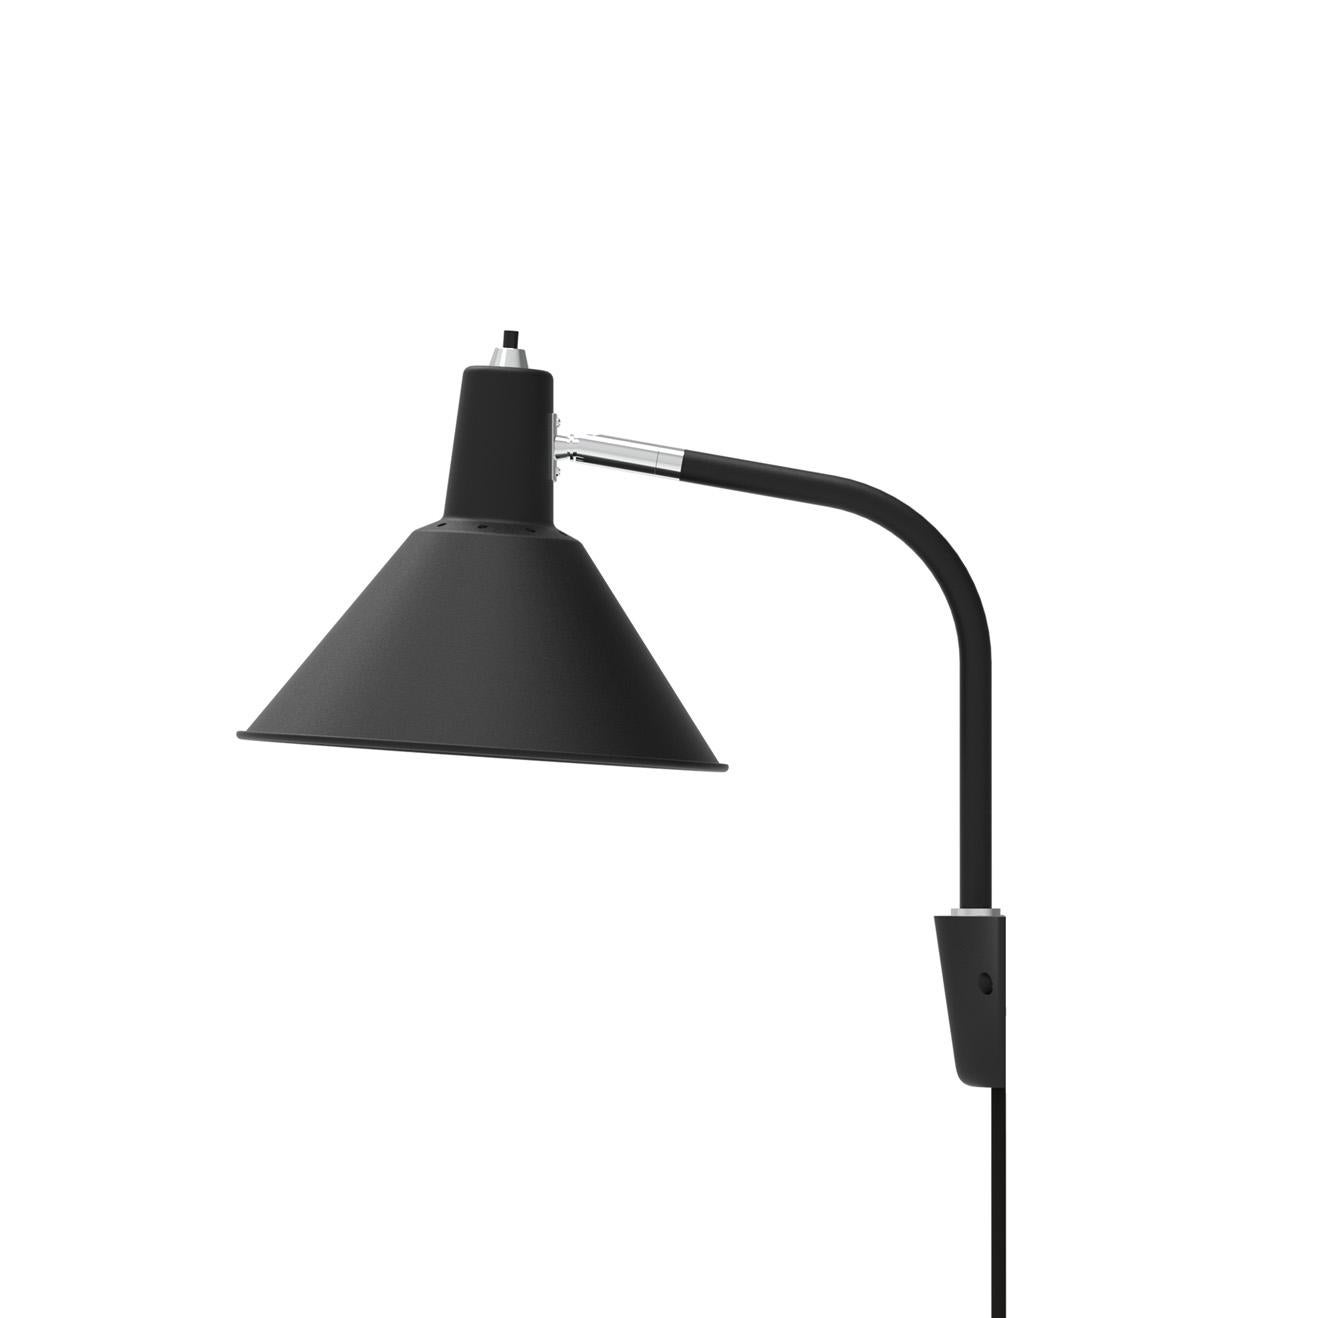 Scandinavian Modern Arcon Wall Lamp in Black/Chrome - By NUAD For Sale